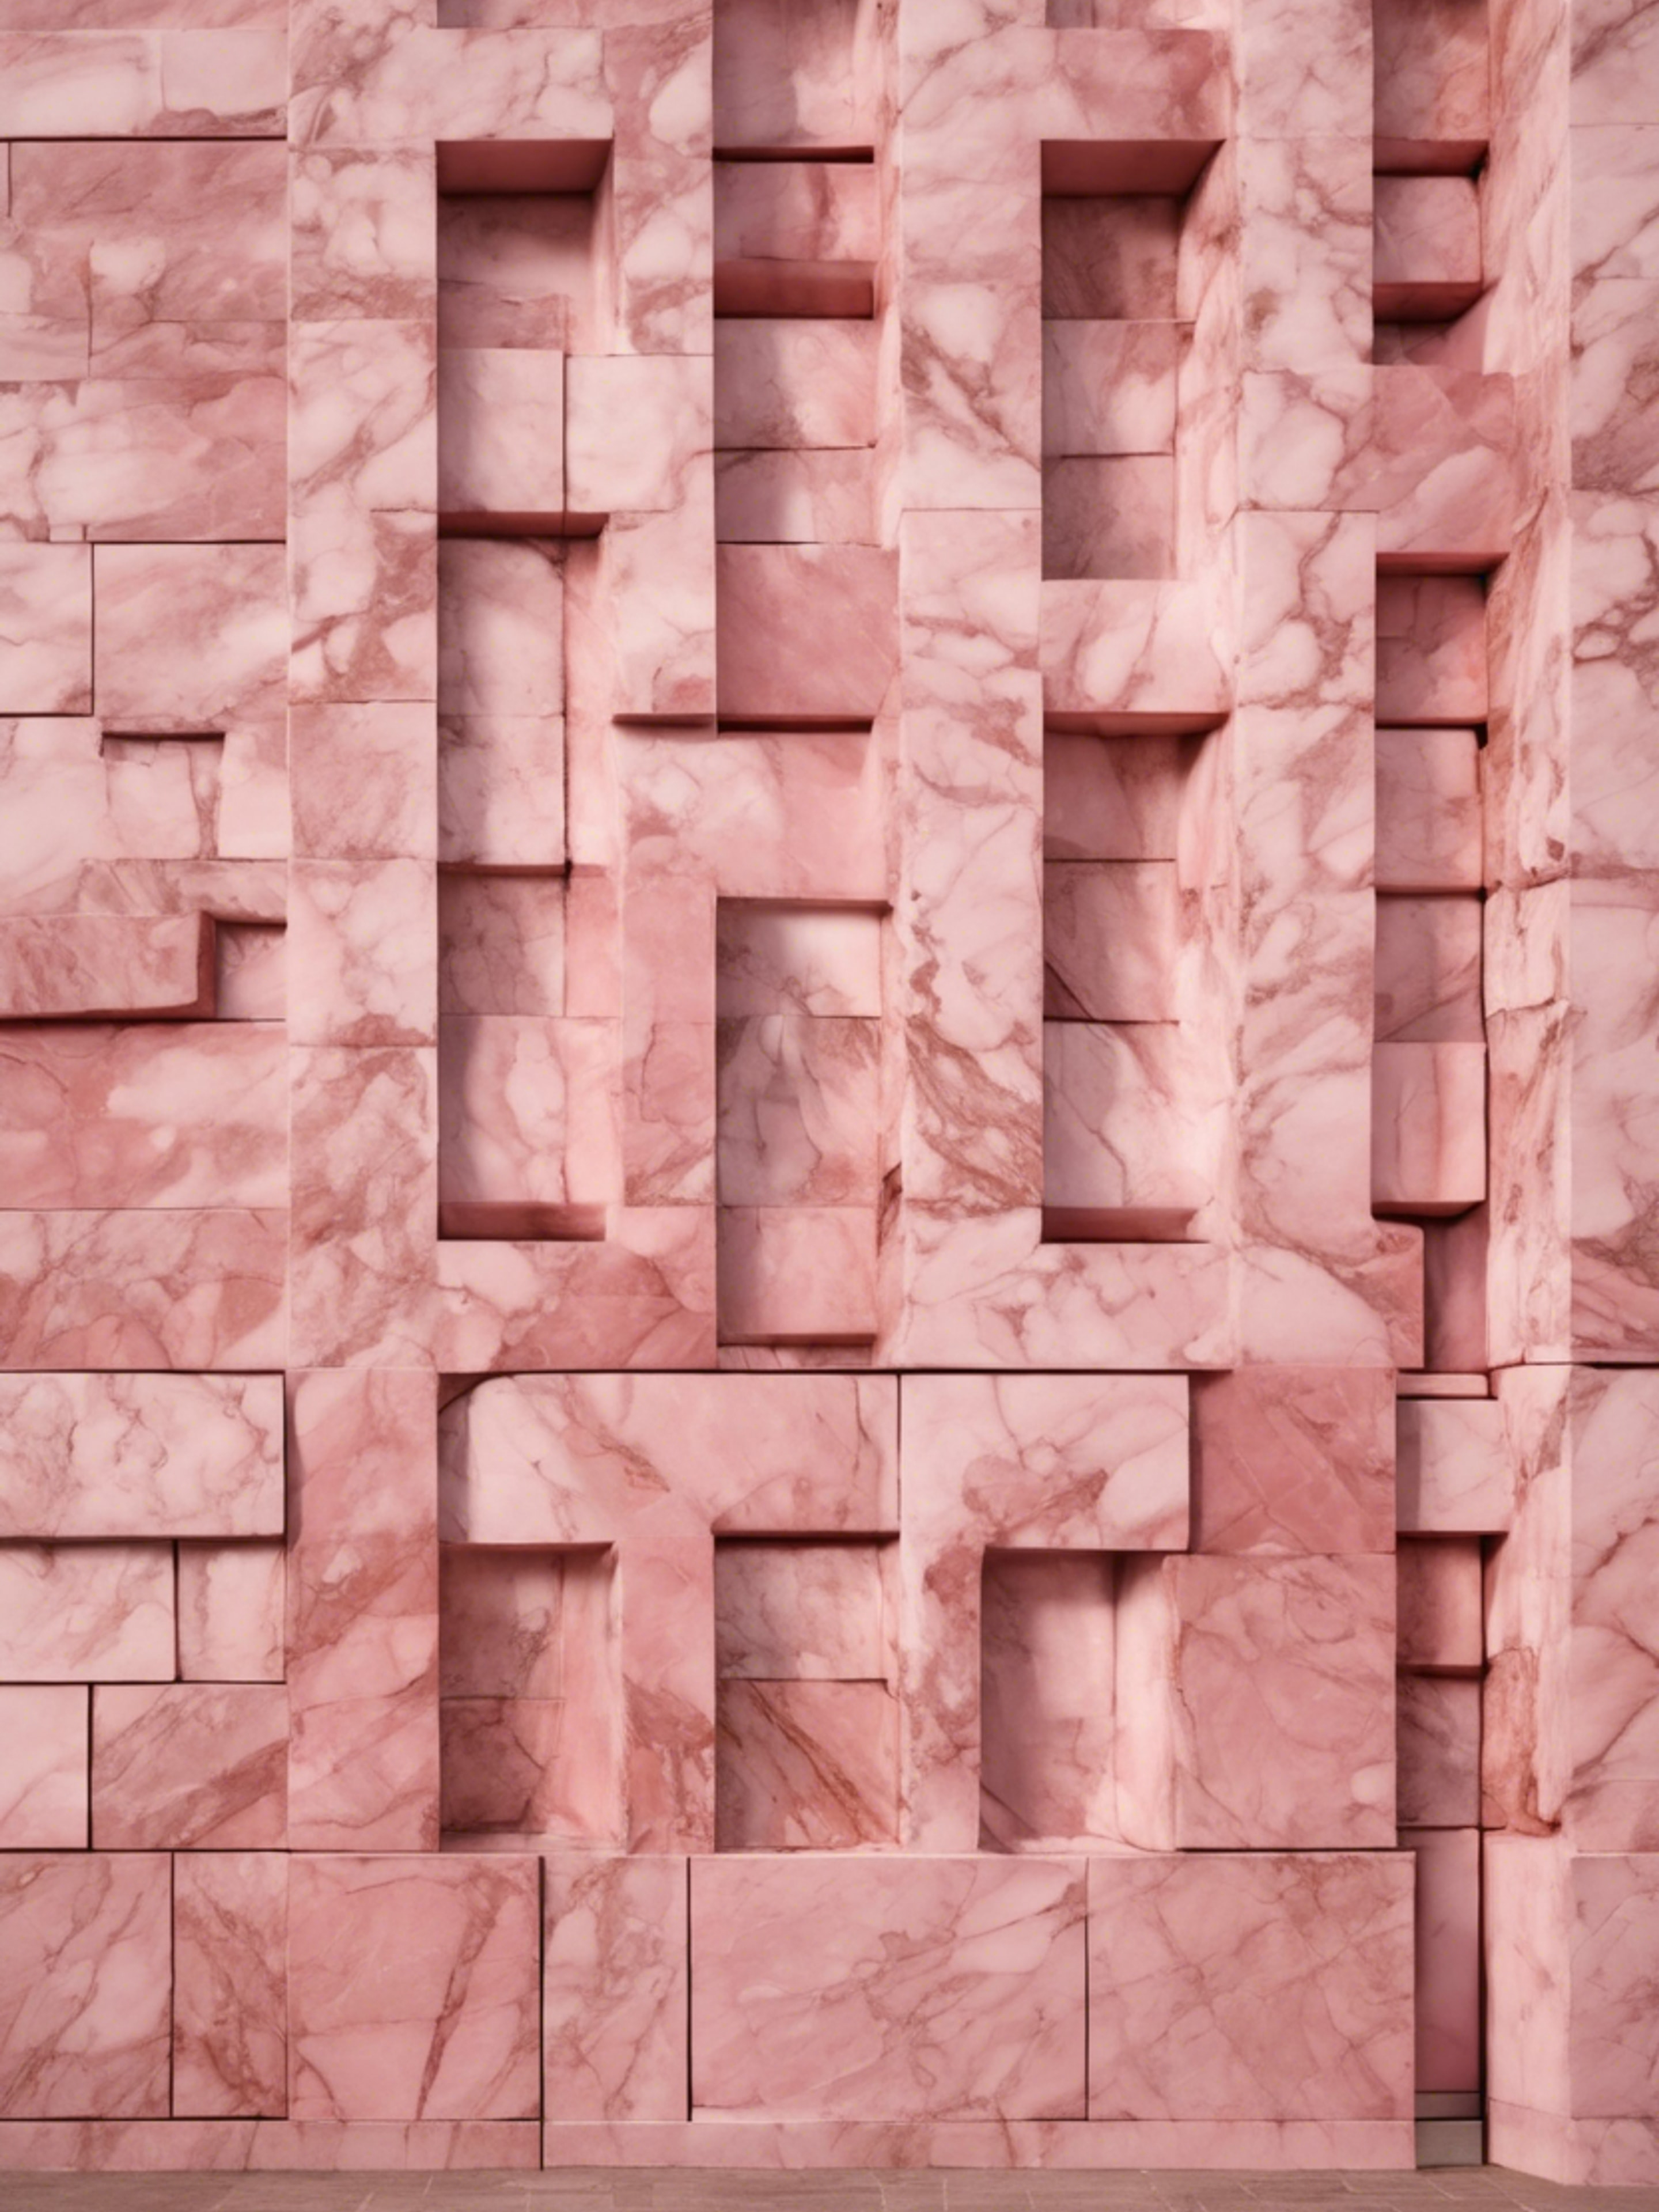 An outdoor wall of a building, made of polished pink marble. วอลล์เปเปอร์[24255f95efd34f59a019]